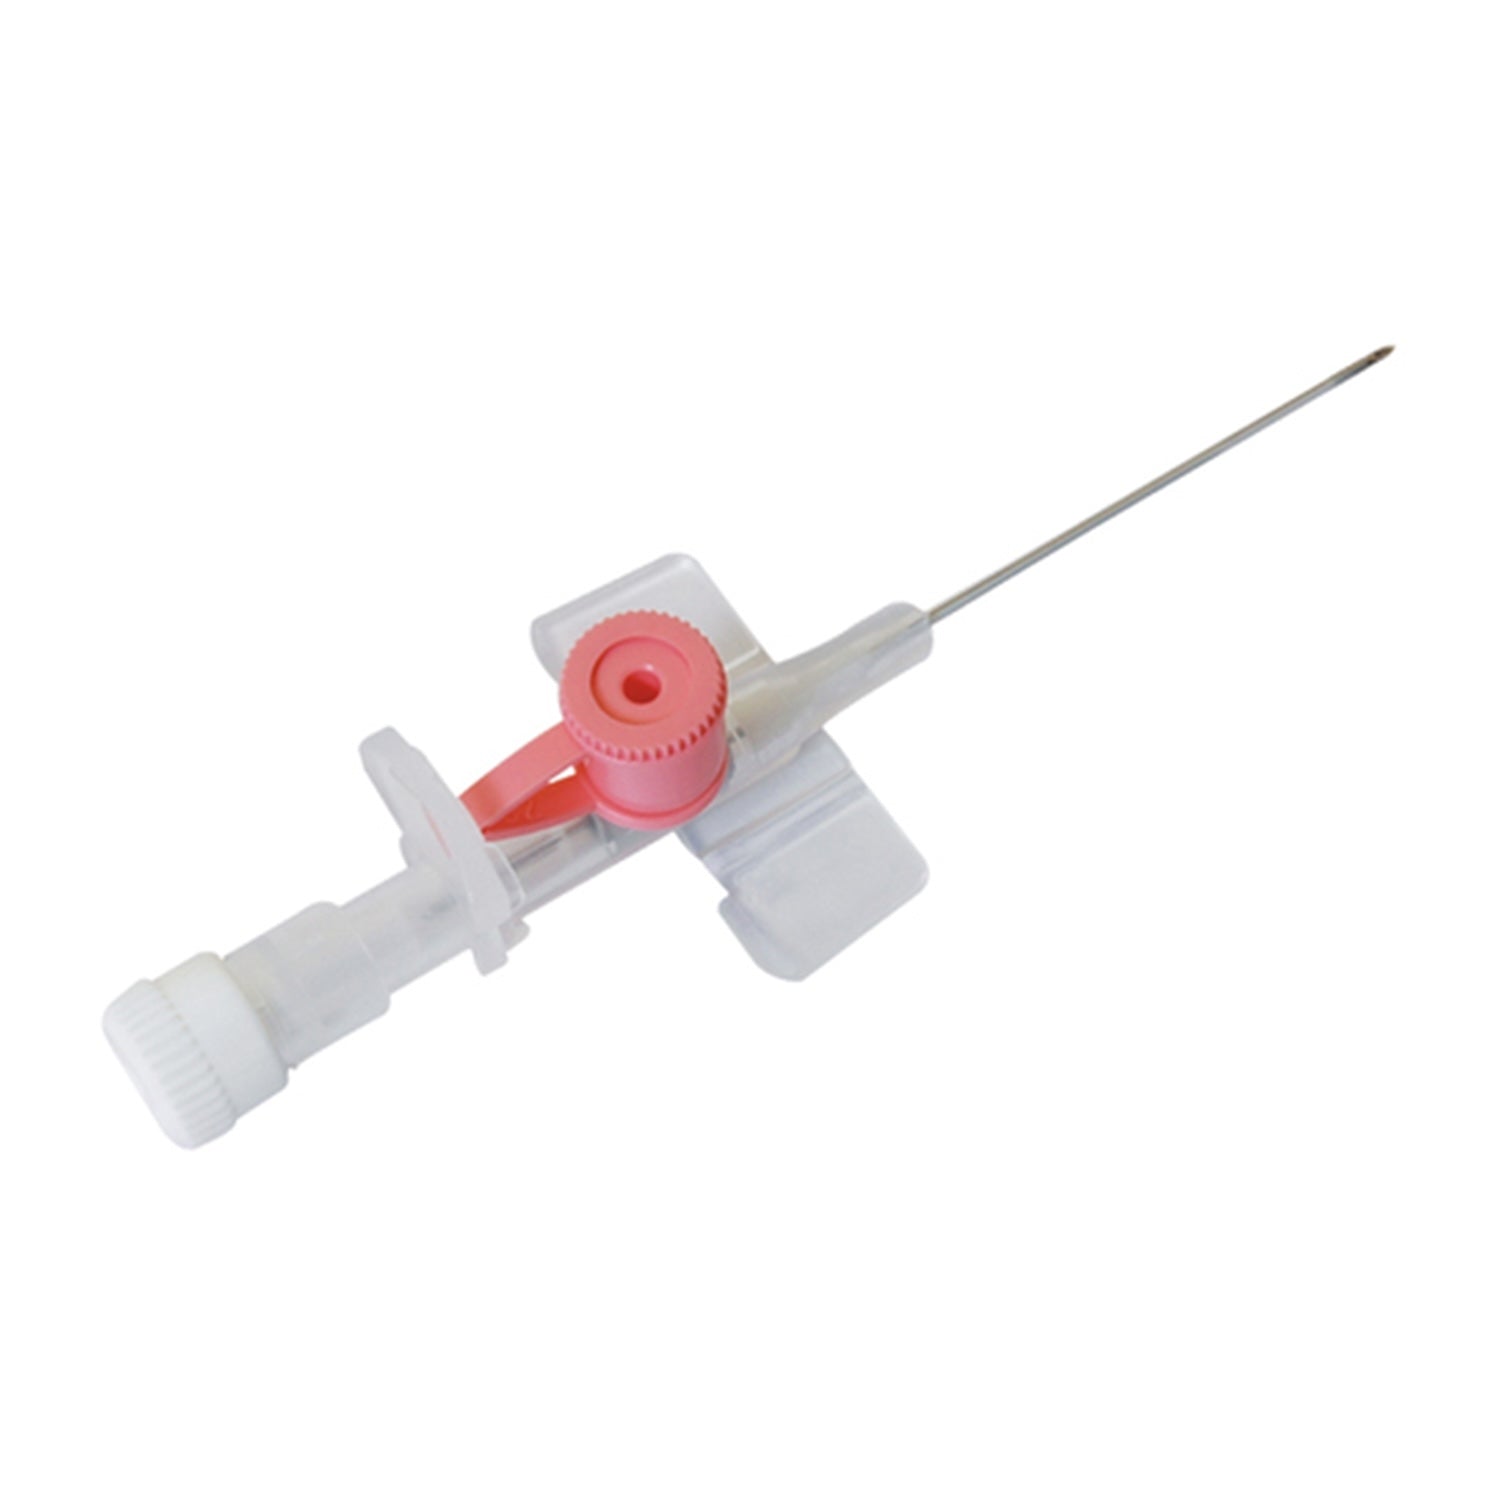 BD Venflon Pro Peripheral IV Cannula with Injection Port | Pink x 20G x 32 x 1mm | Pack of 50 (1)